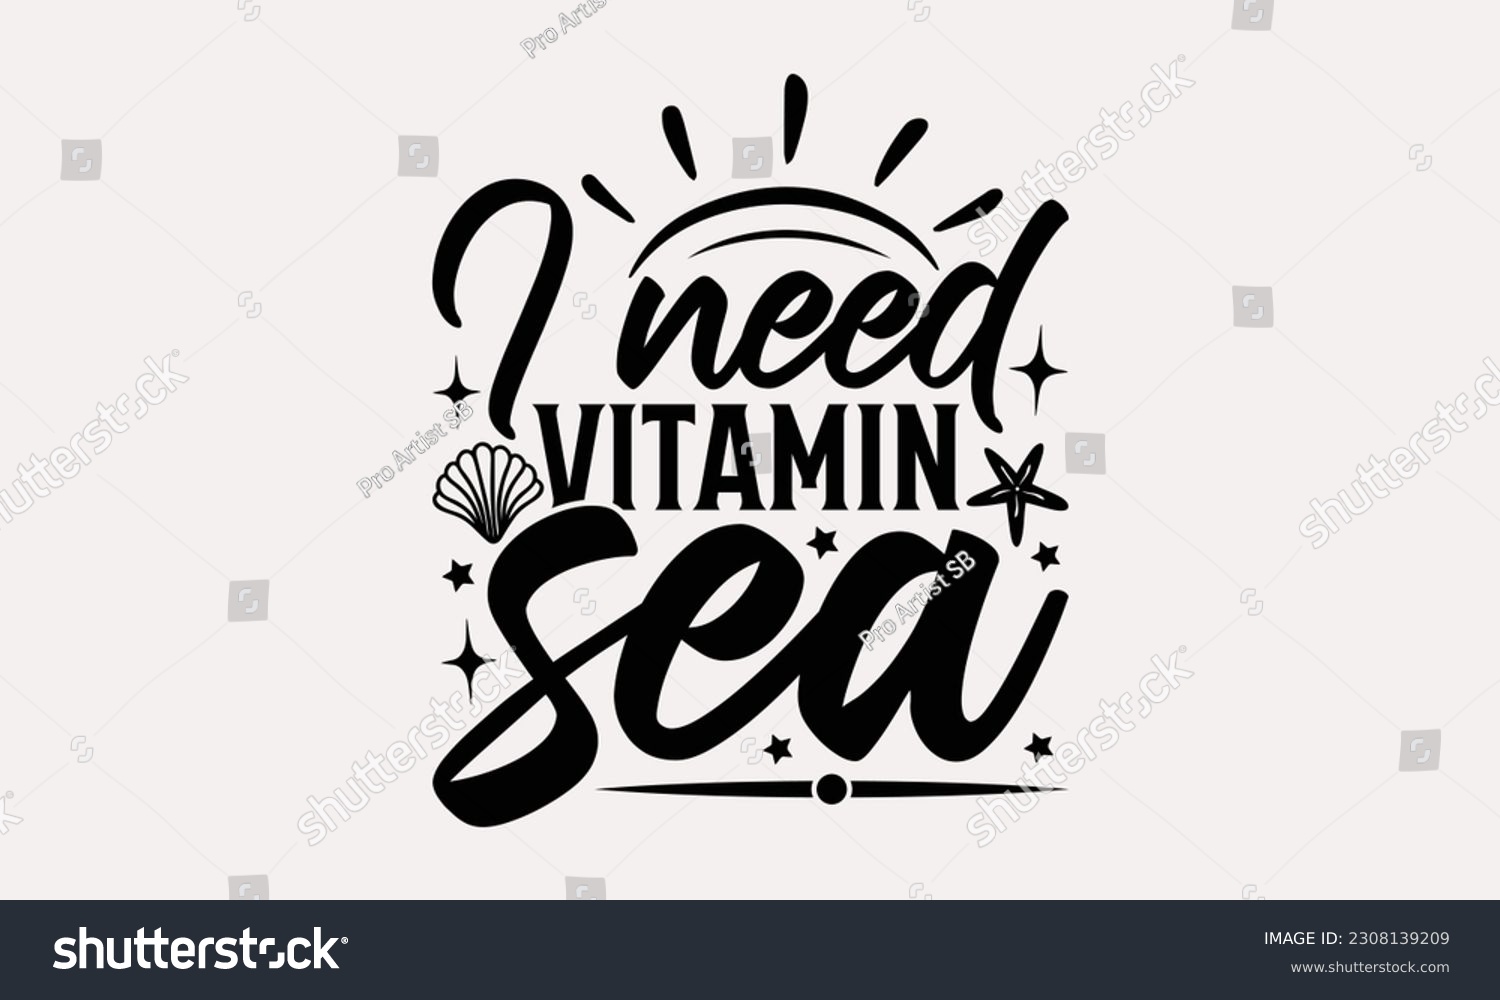 SVG of I need vitamin sea - Summer T-shirt Design, Typography Poster with Old Style Camera and Quote, Handmade Calligraphy Vector Illustration. svg